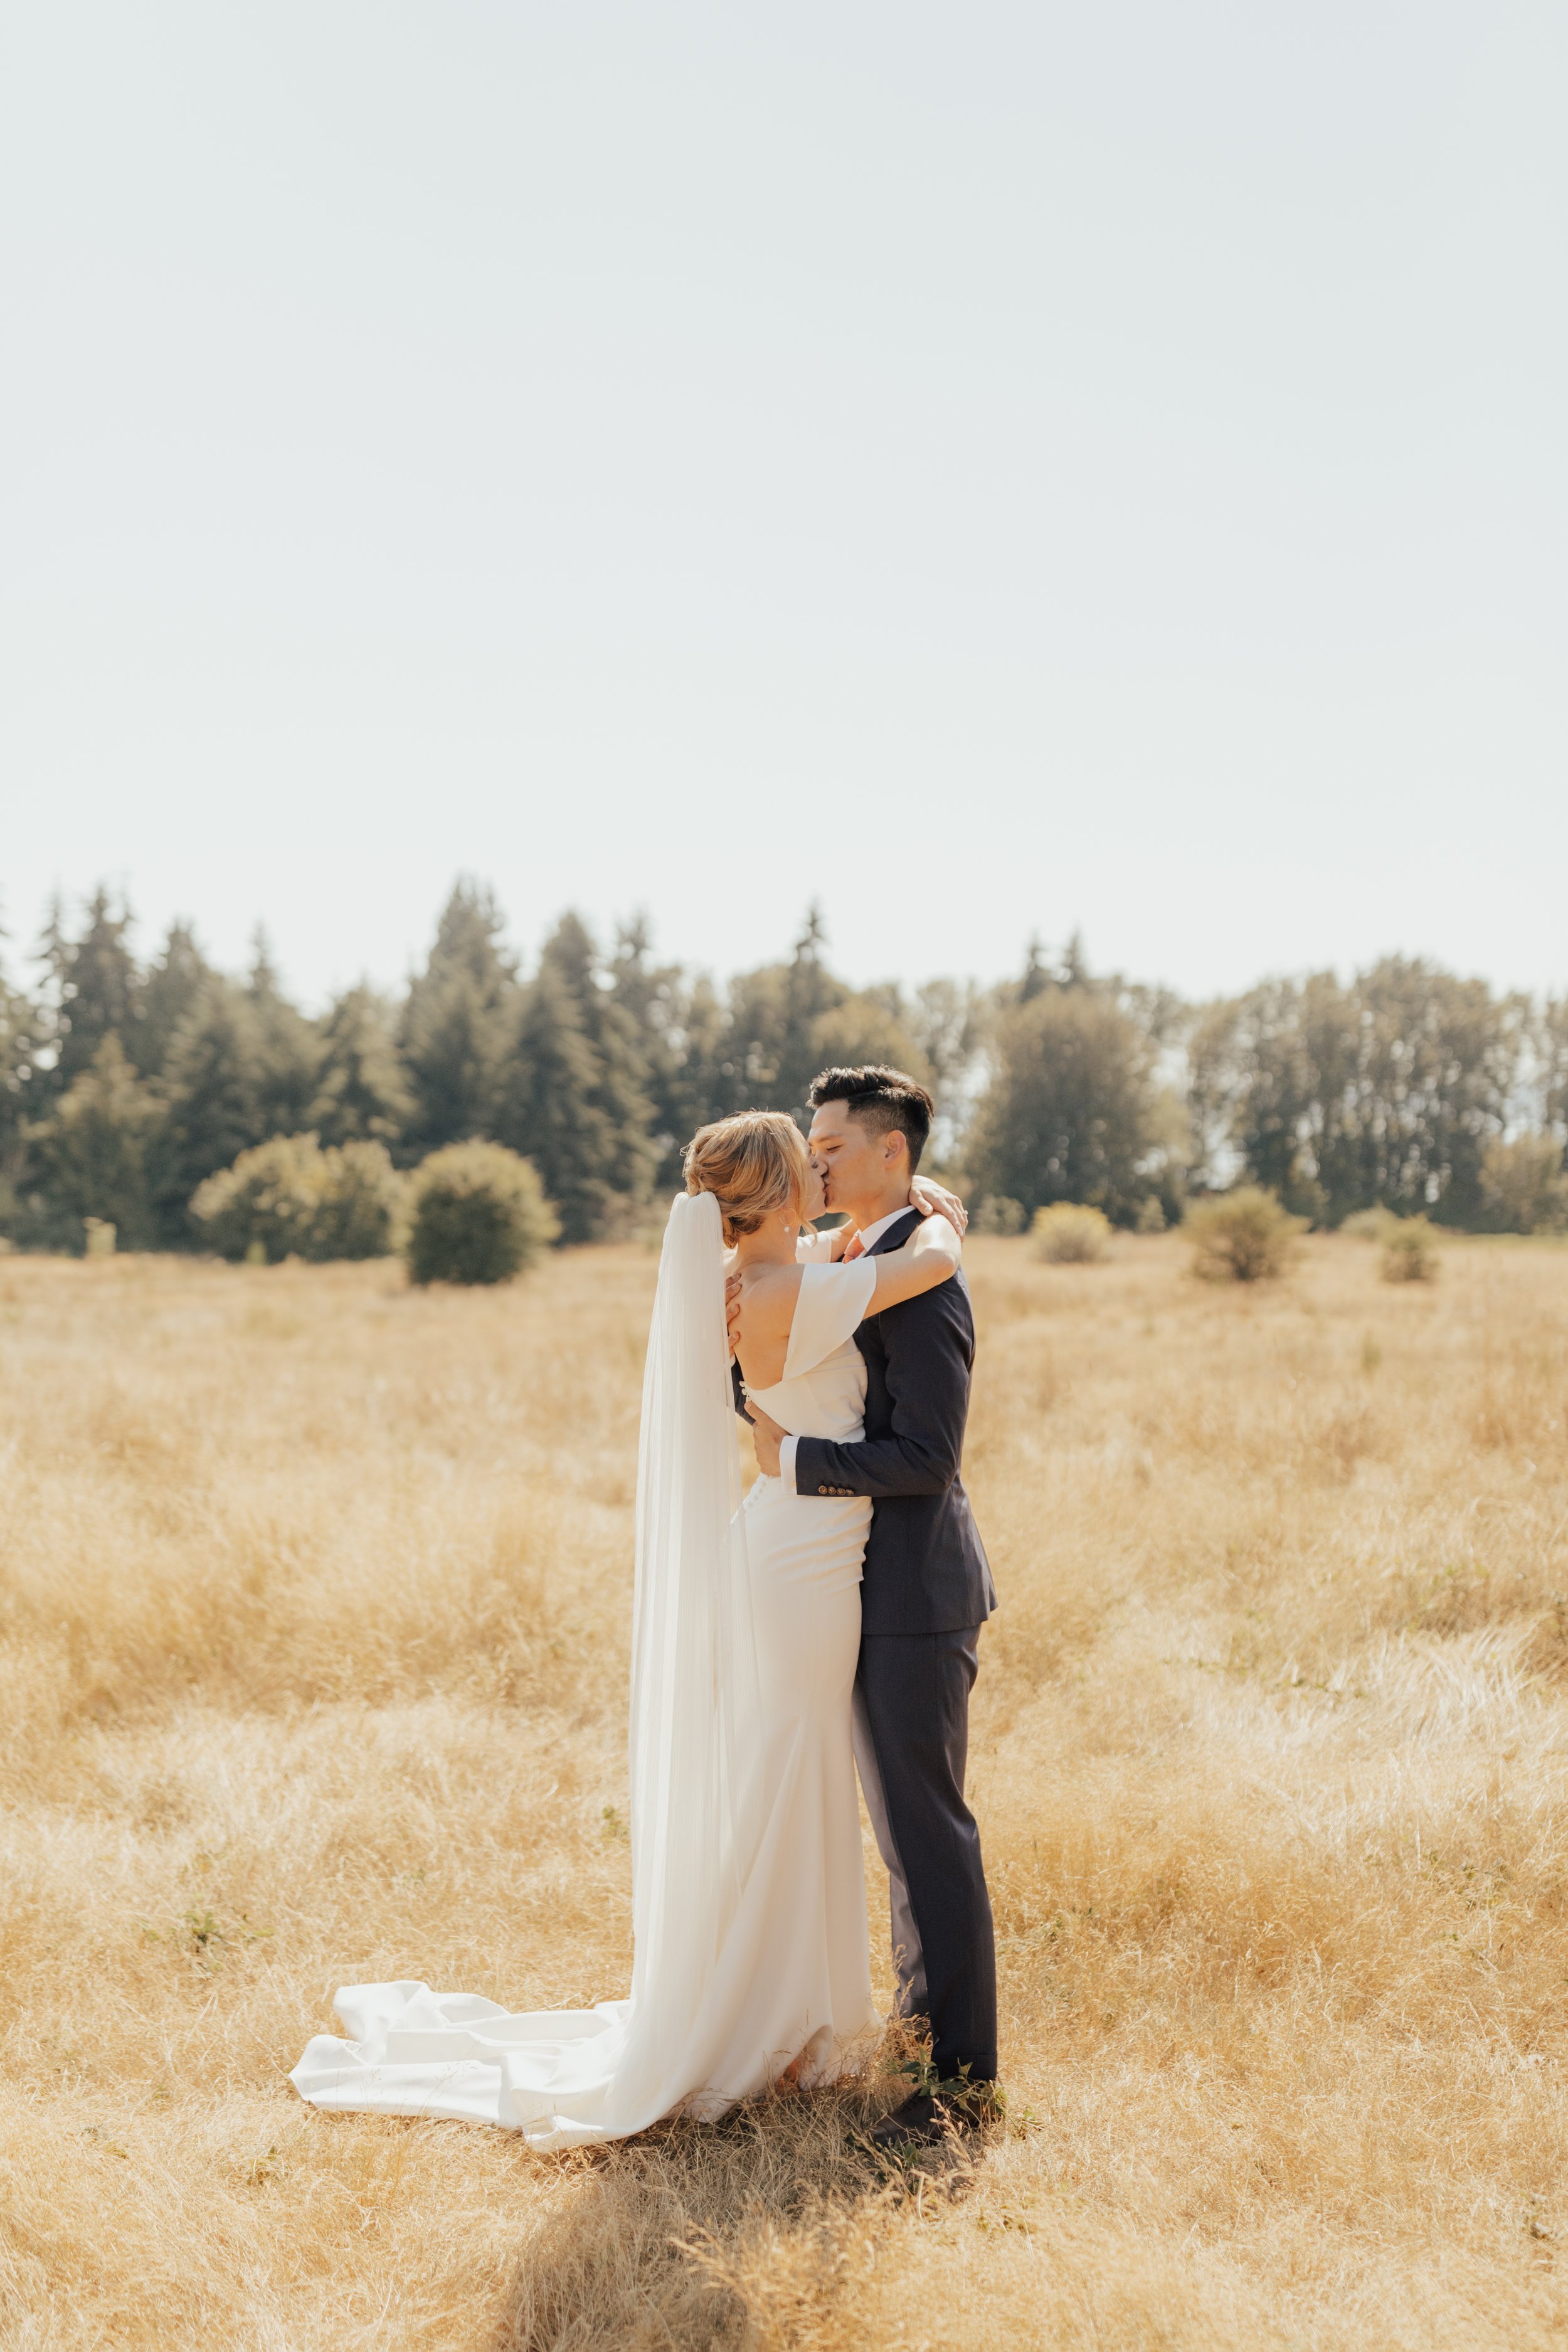 pacific-engagements-discovery-park-candid-wedding-portraits-bride-and-groom-rachel-syrisko-photography